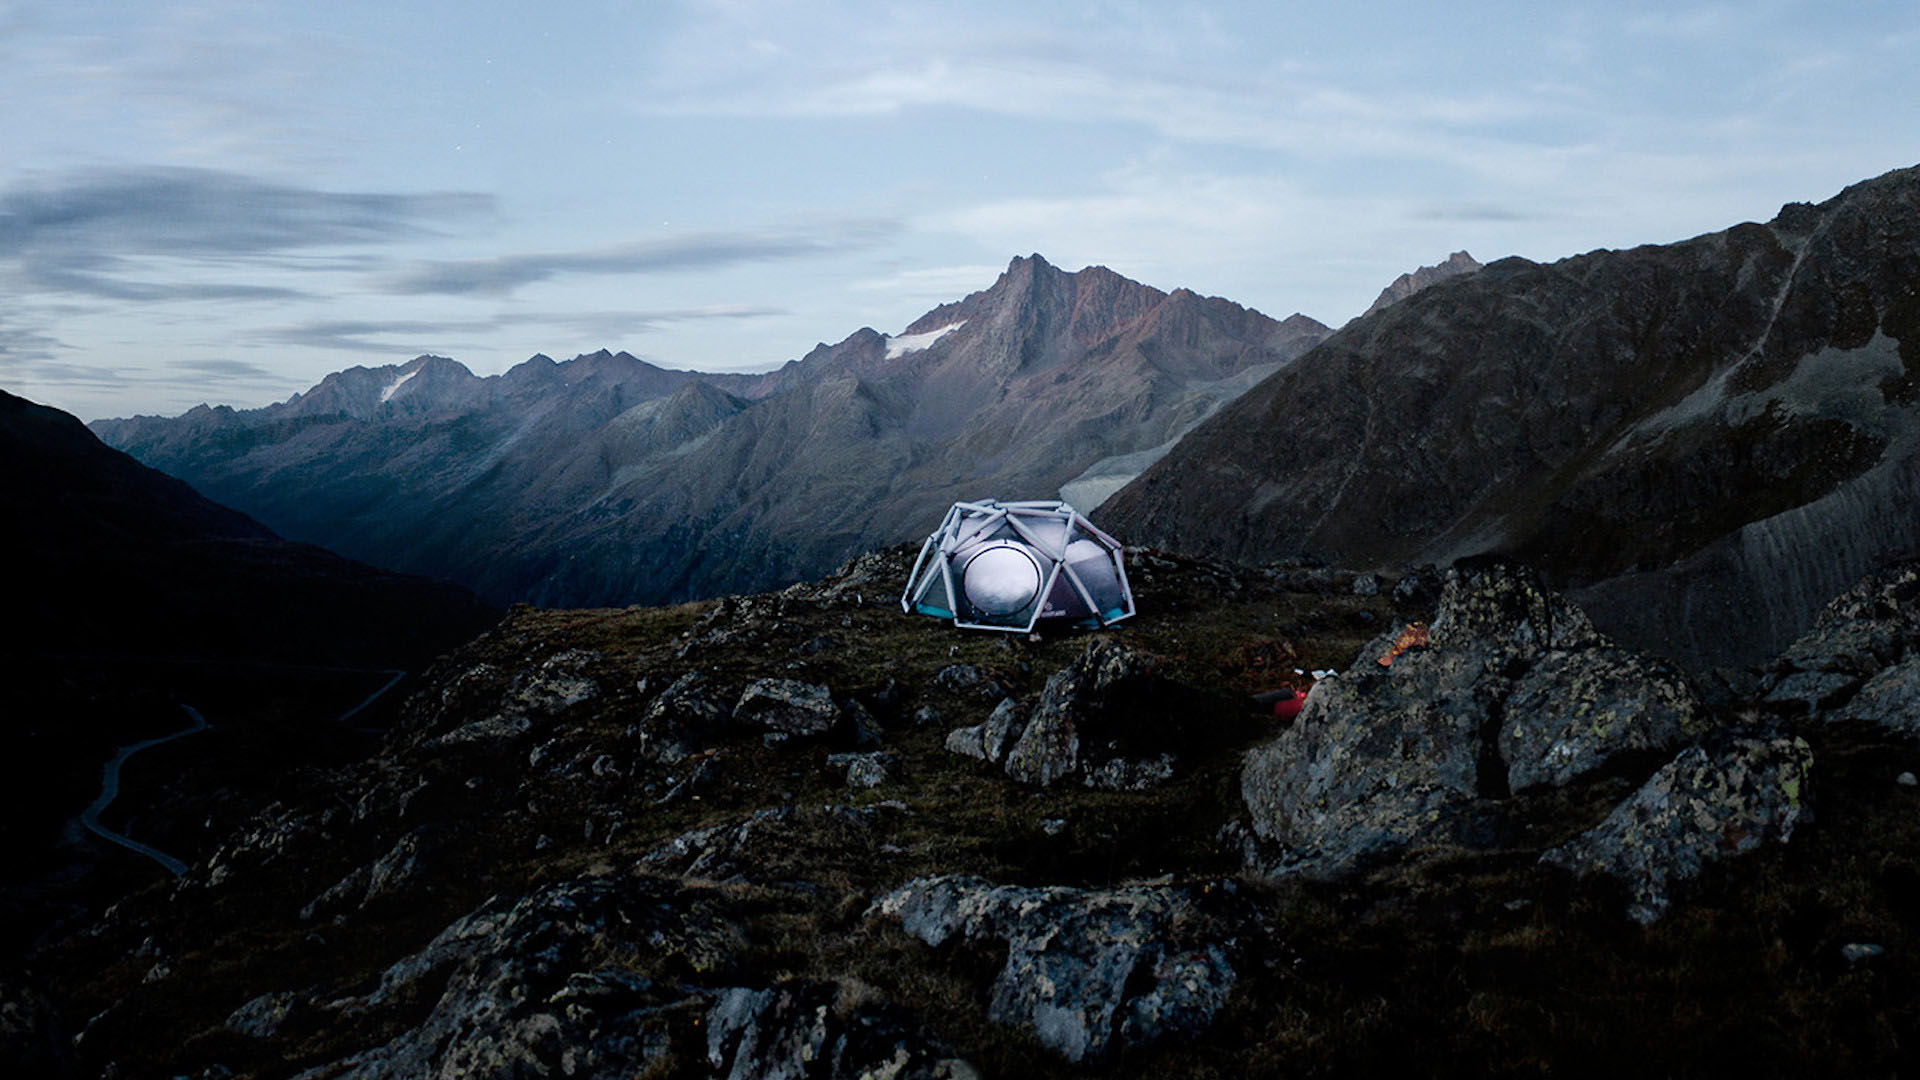 Best Camping Gear: Get the Best Camping Gear for Your Next Adventure!